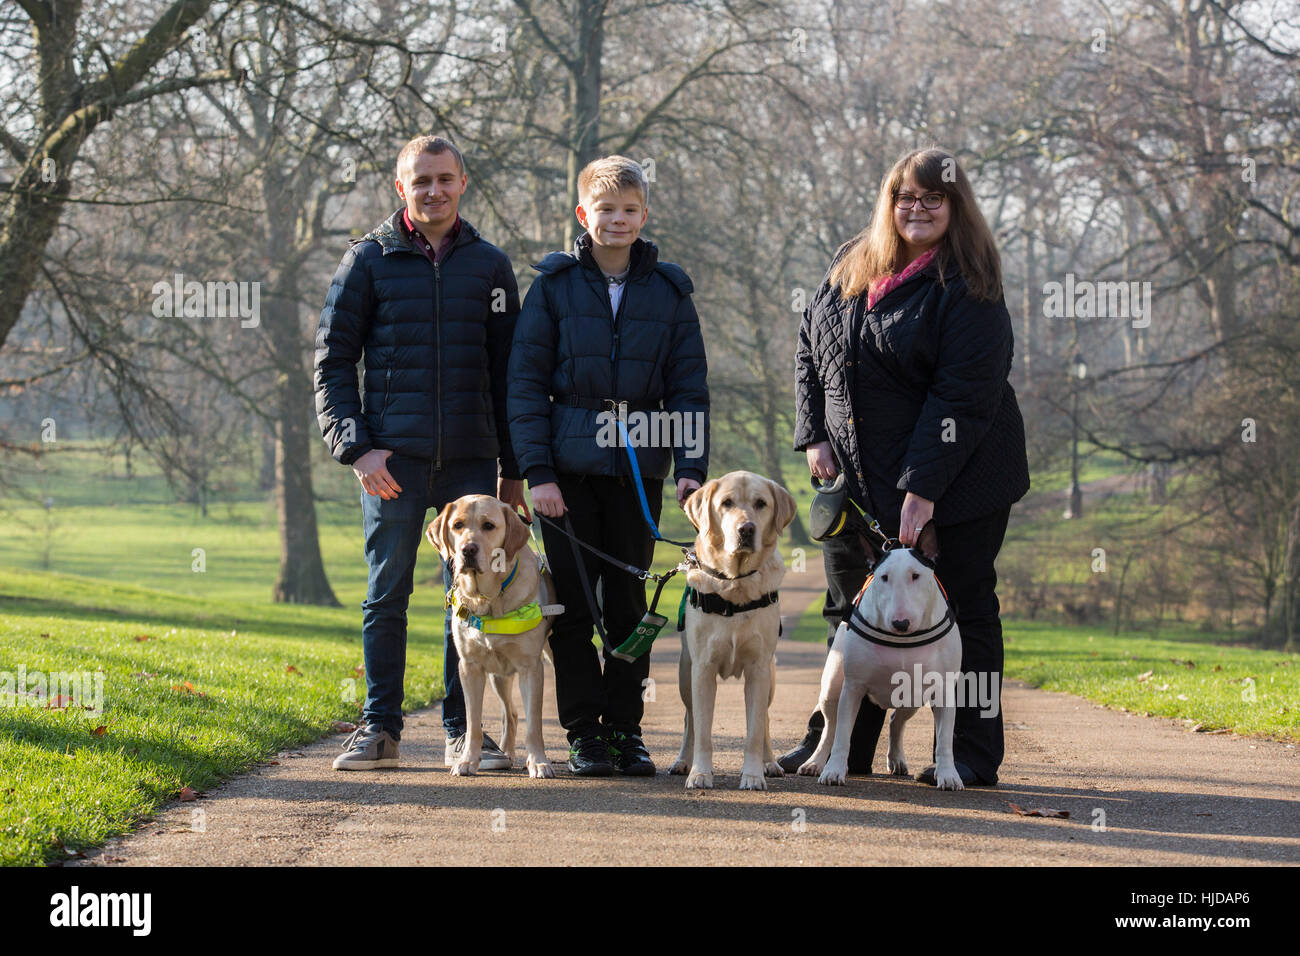 London, UK. 24th Jan, 2017. L-R: Hudson, the Labrador Retriever guide dog with owner Nathan Edge, 22, from North Hykeham, Lincs, Caddie the Labrador Retriever autism awareness dog with owner Joel Sayer, 13, from Newquay, Cornwall and Bowser, the Bull Terrier, with owner Sally Degan, 26, from Scunthorpe, Lincs. The Kennel Club and Eukanuba have selected four inspiring Hero Dogs as the 2017 finalists. They forward to the public vote with the winner being announced at Crufts. Charlie, the Military Dog with the British Army did not attend the photocall. Credit: Vibrant Pictures/Alamy Live News Stock Photo